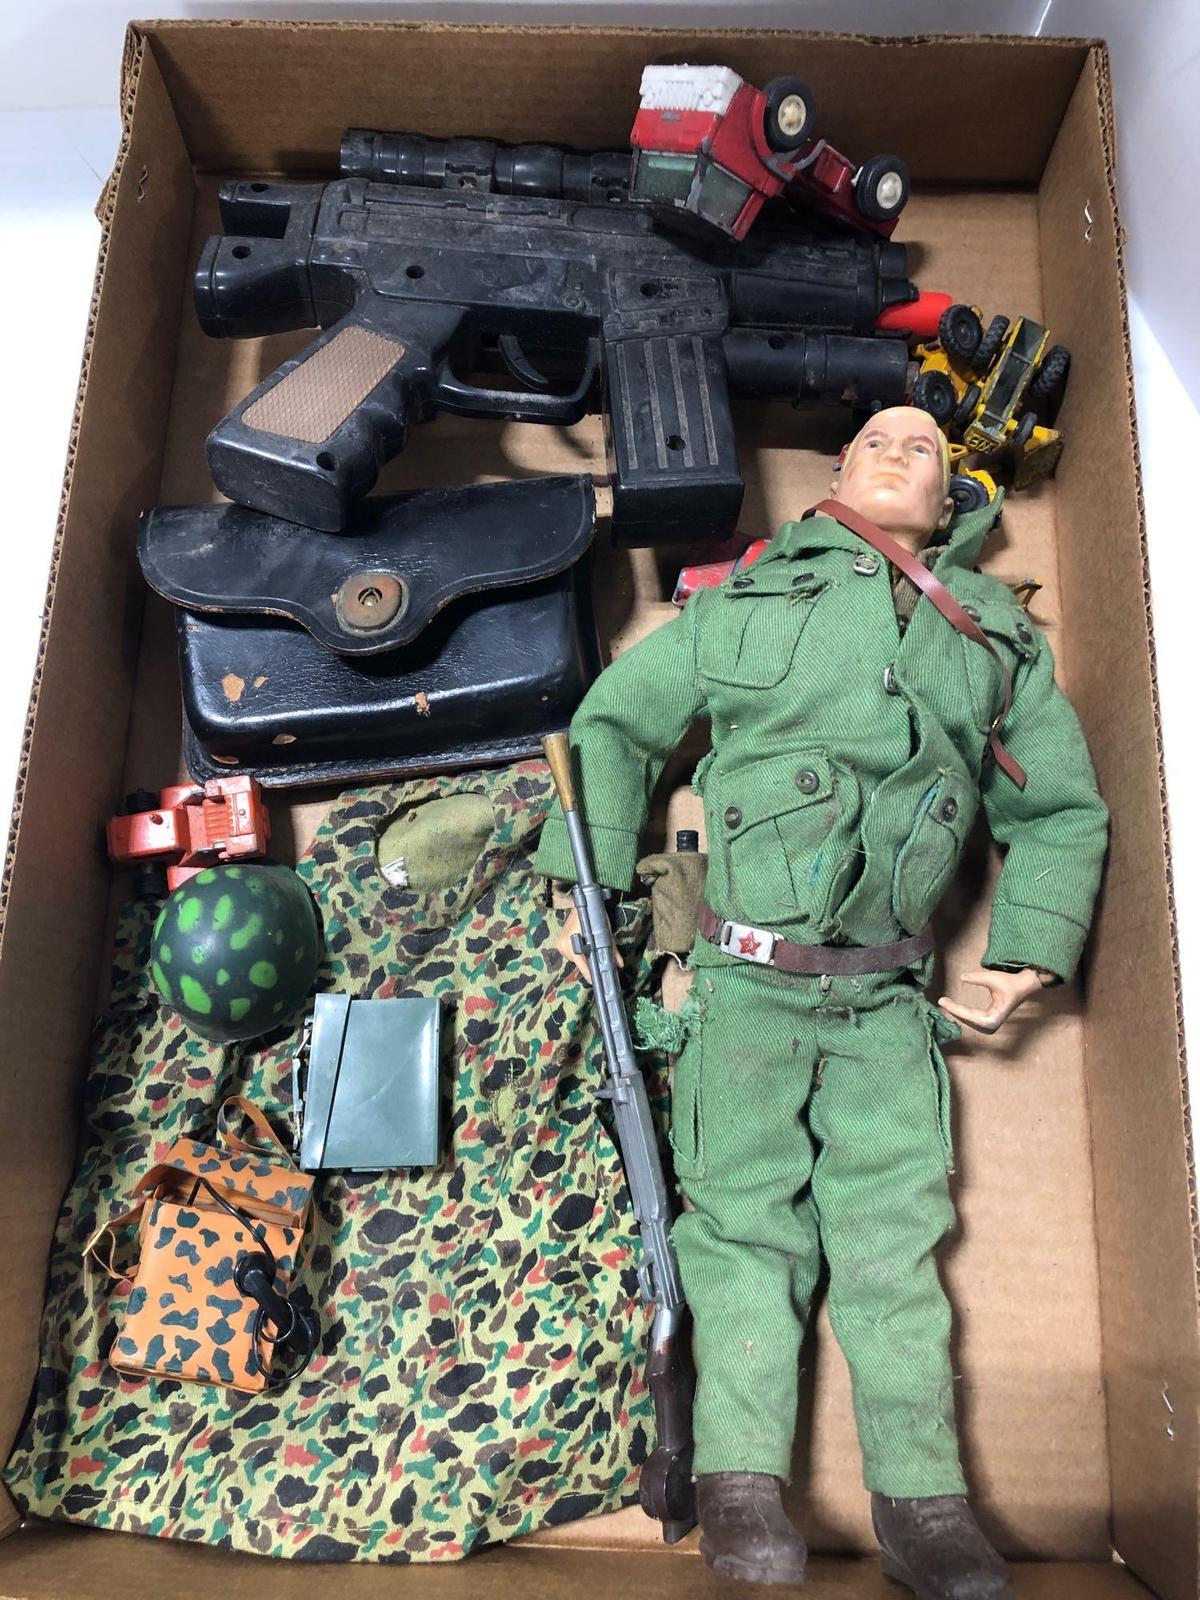 G.I. Joe doll accessories and other vintage toys